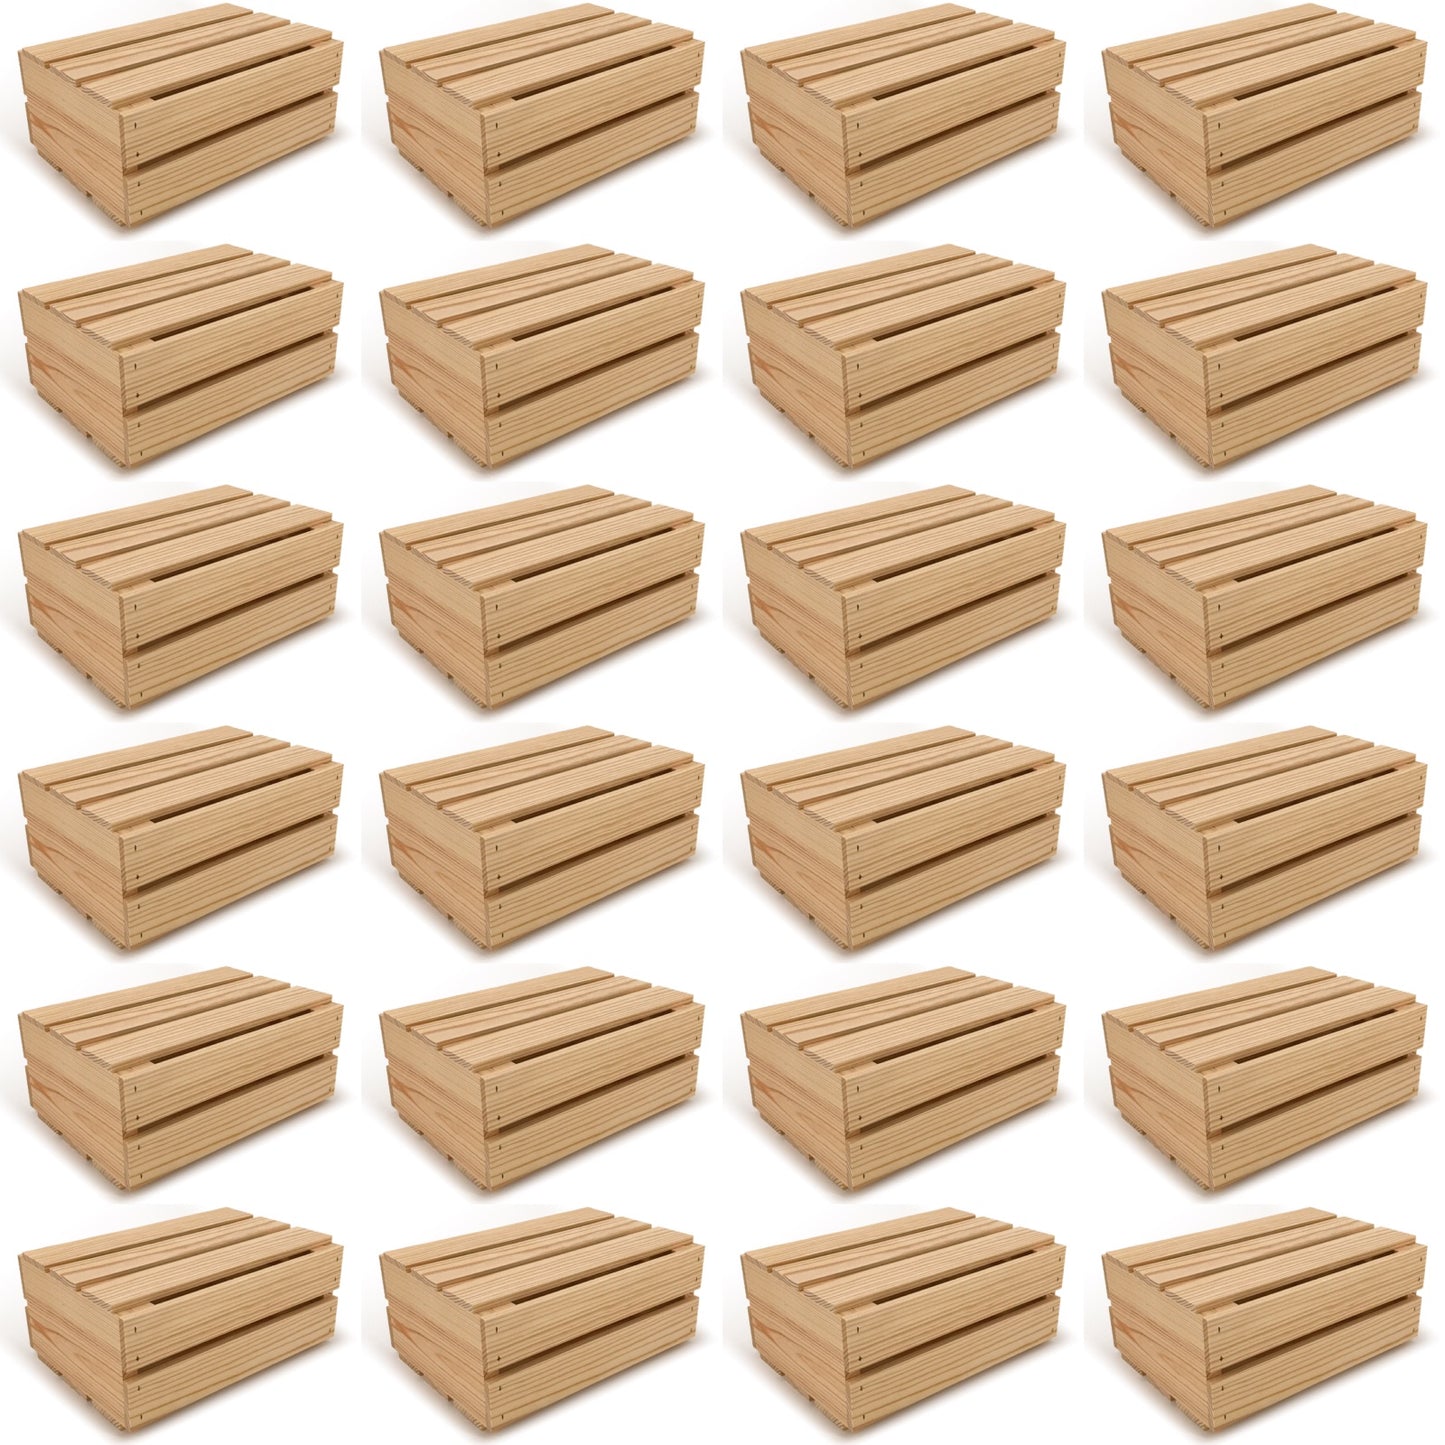 24 Small wooden crates with lid 12x9x5.25